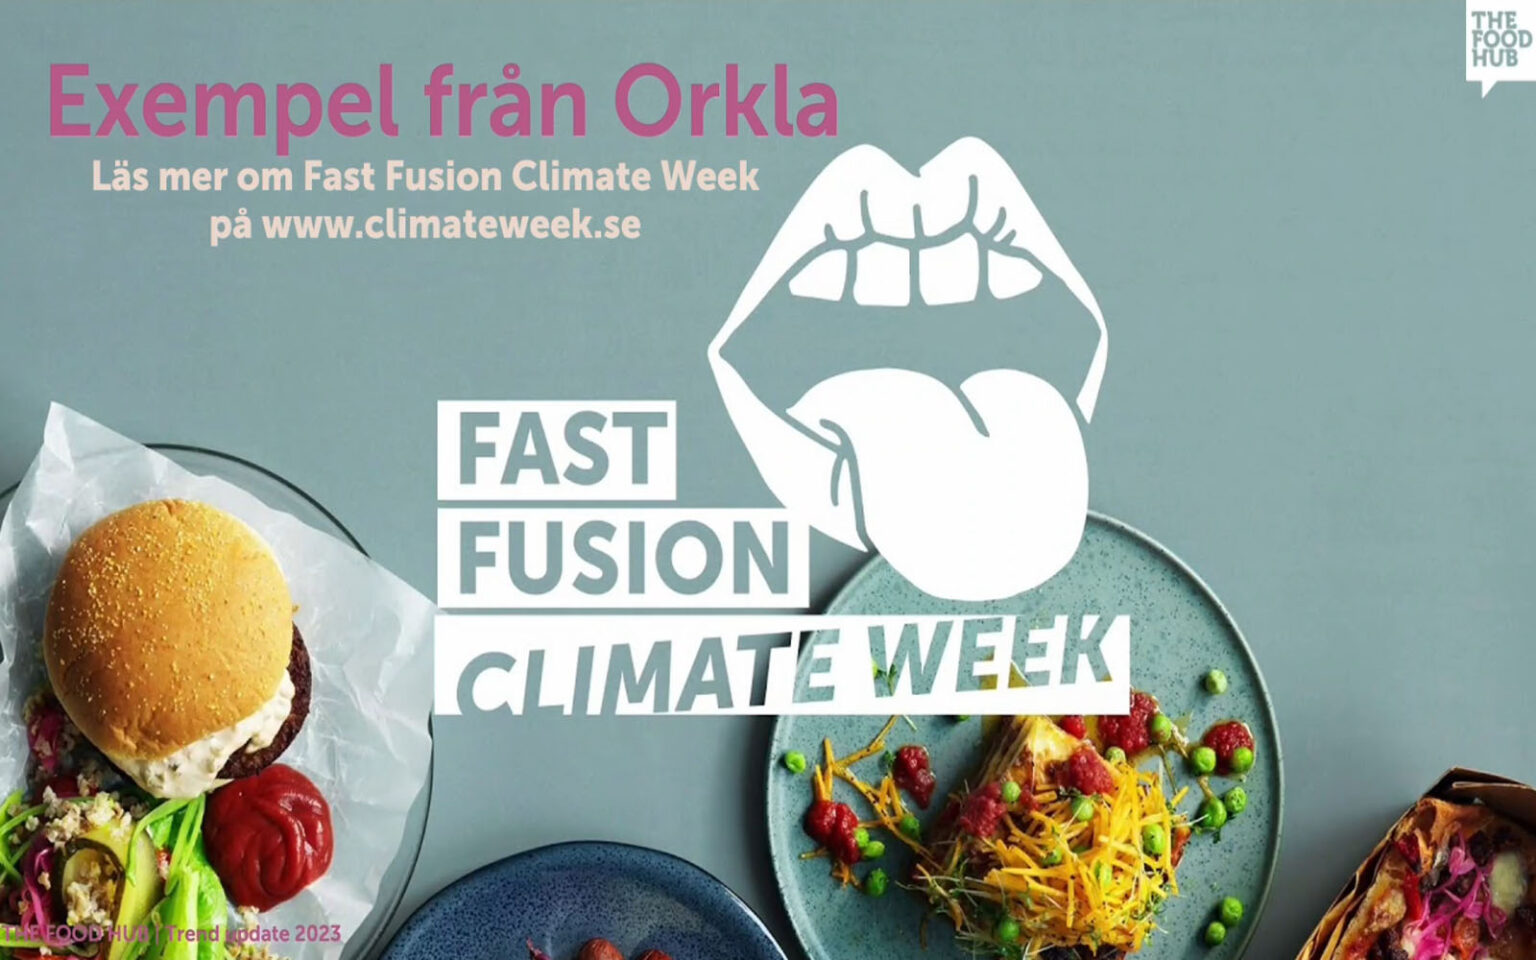 Trend update om Fast Fusion Climate Week.